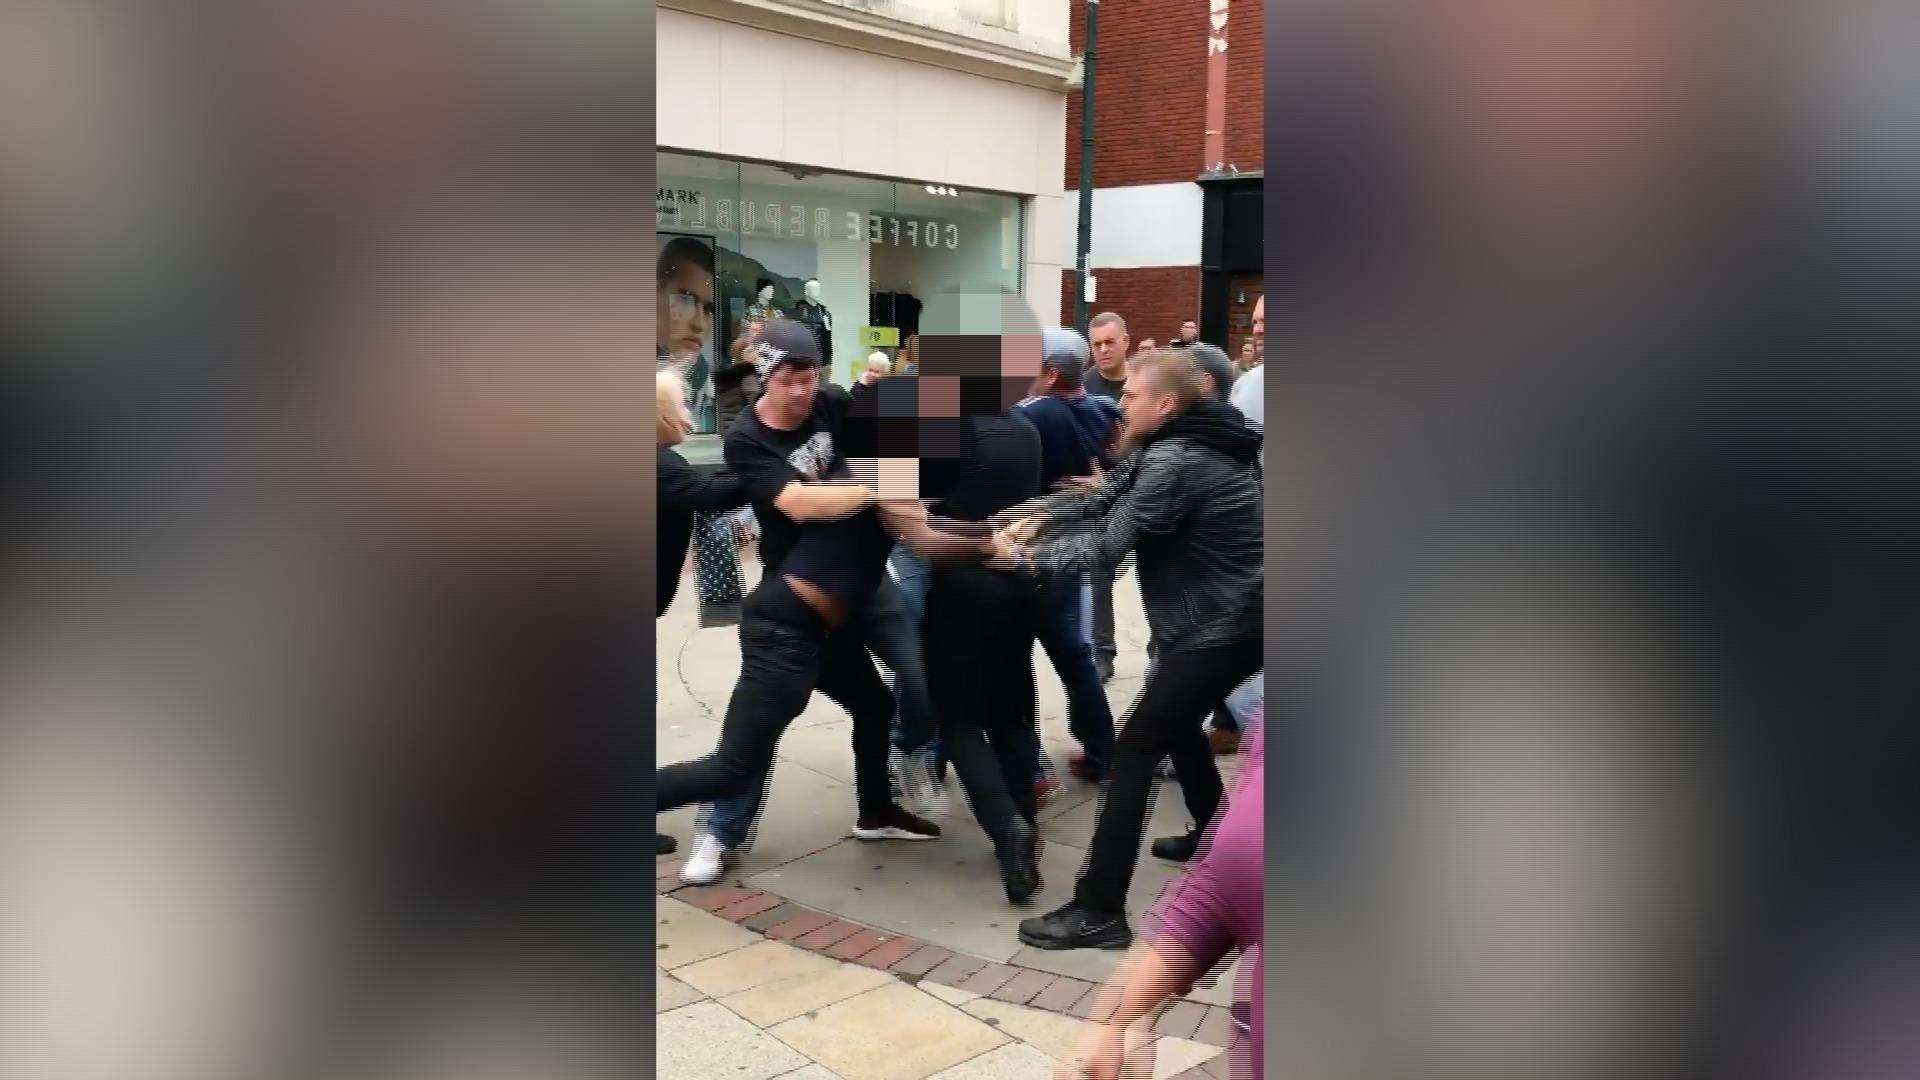 Video shows the fight outside Primark in Chatham (4283981)